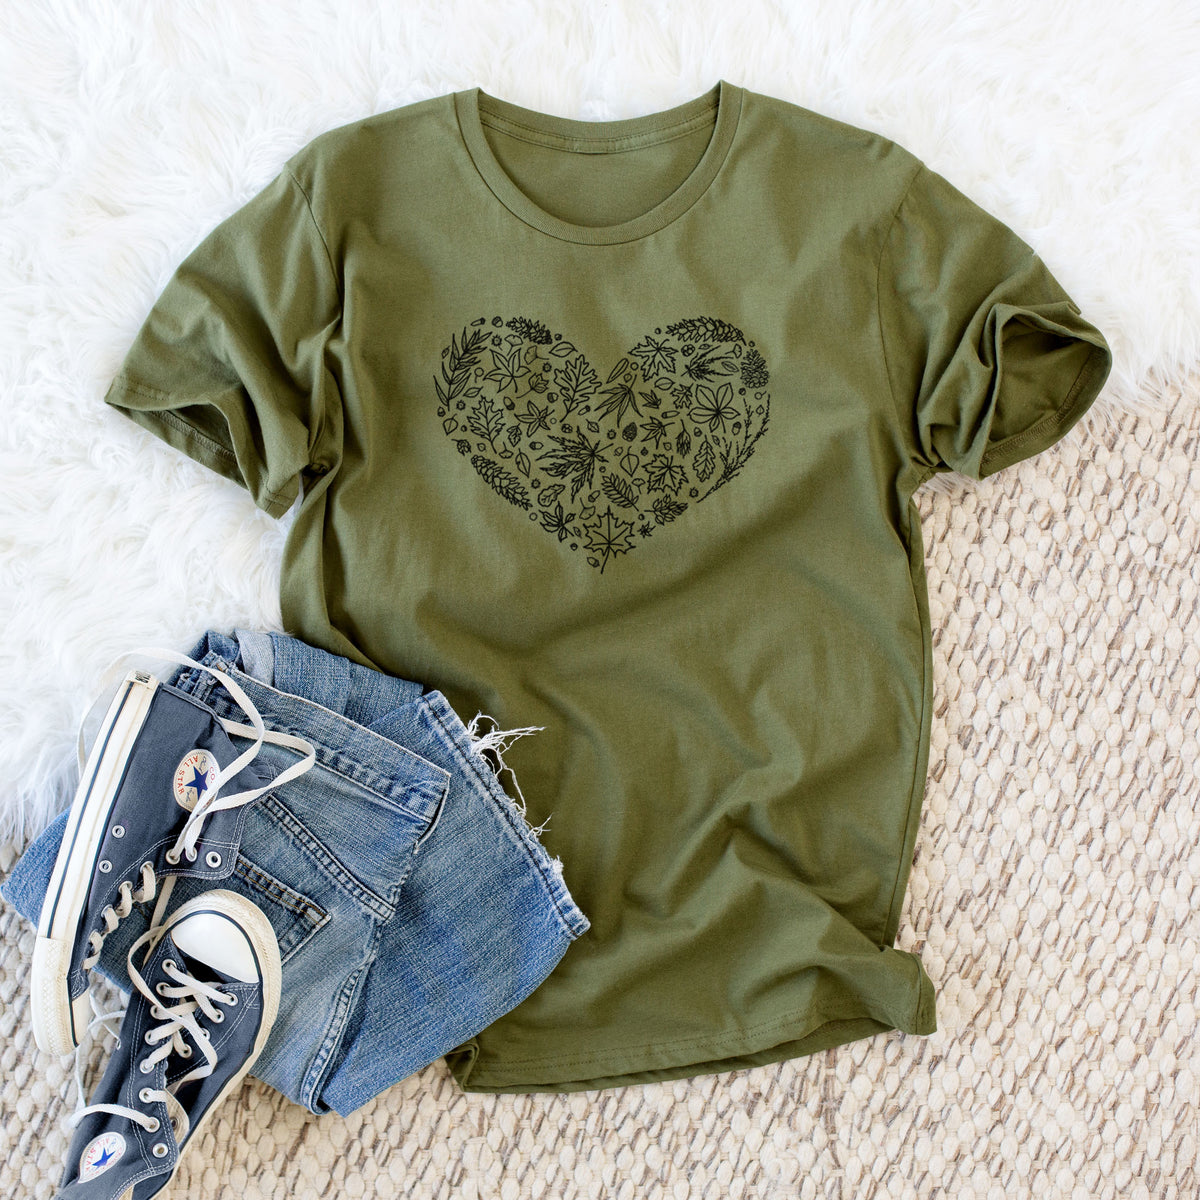 Heart Full of Autumn Leaves - Unisex Crewneck - Made in USA - 100% Organic Cotton